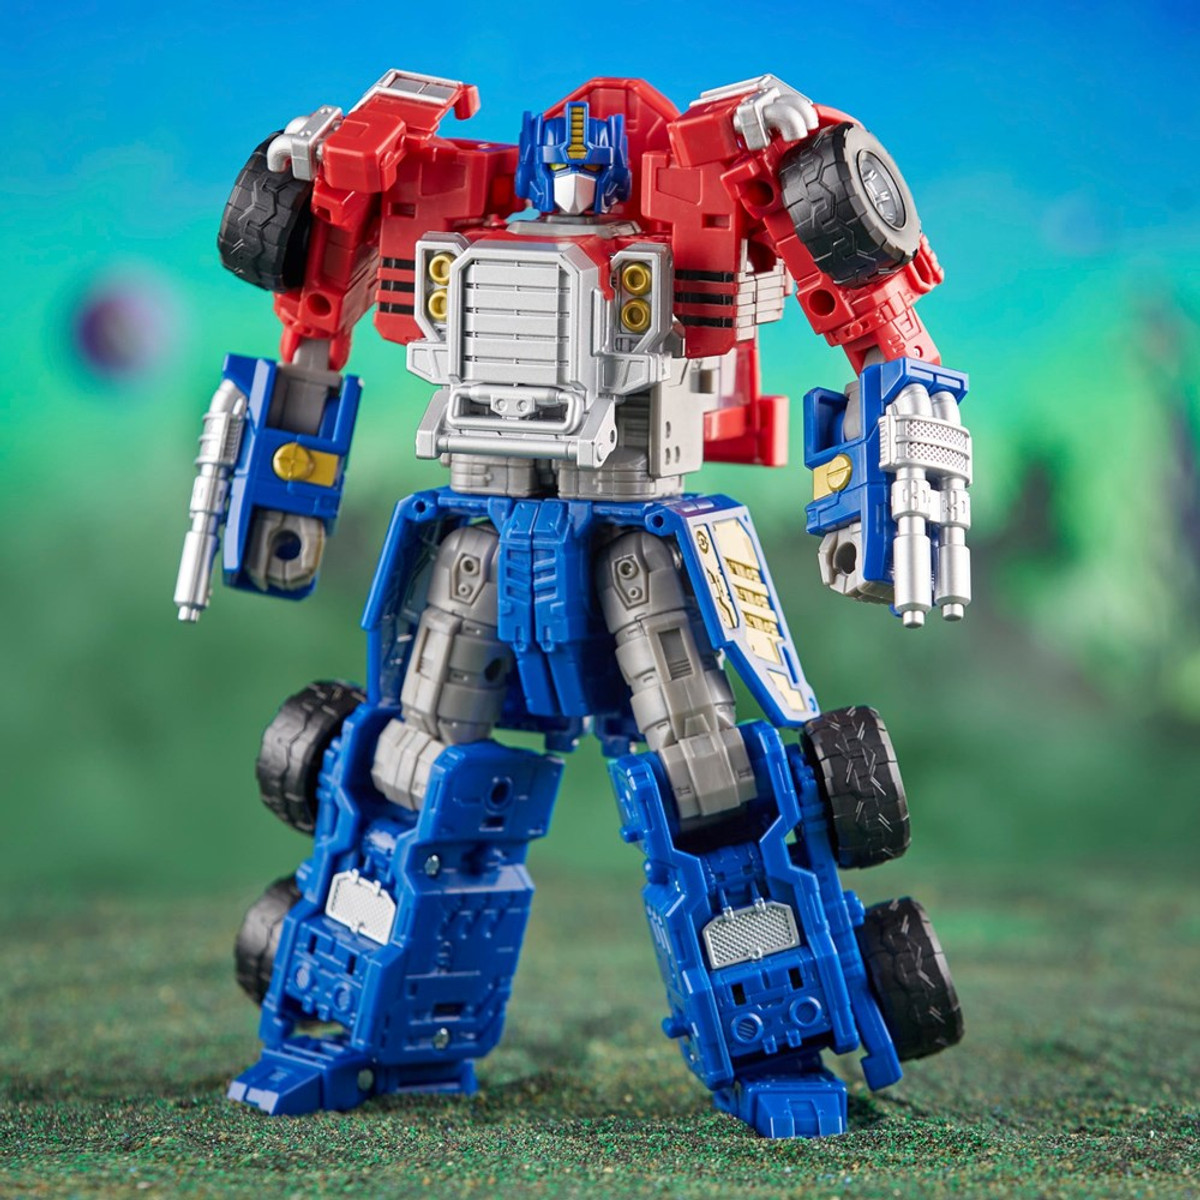 Transformers Toys Generations Legacy Core Optimus Prime Action